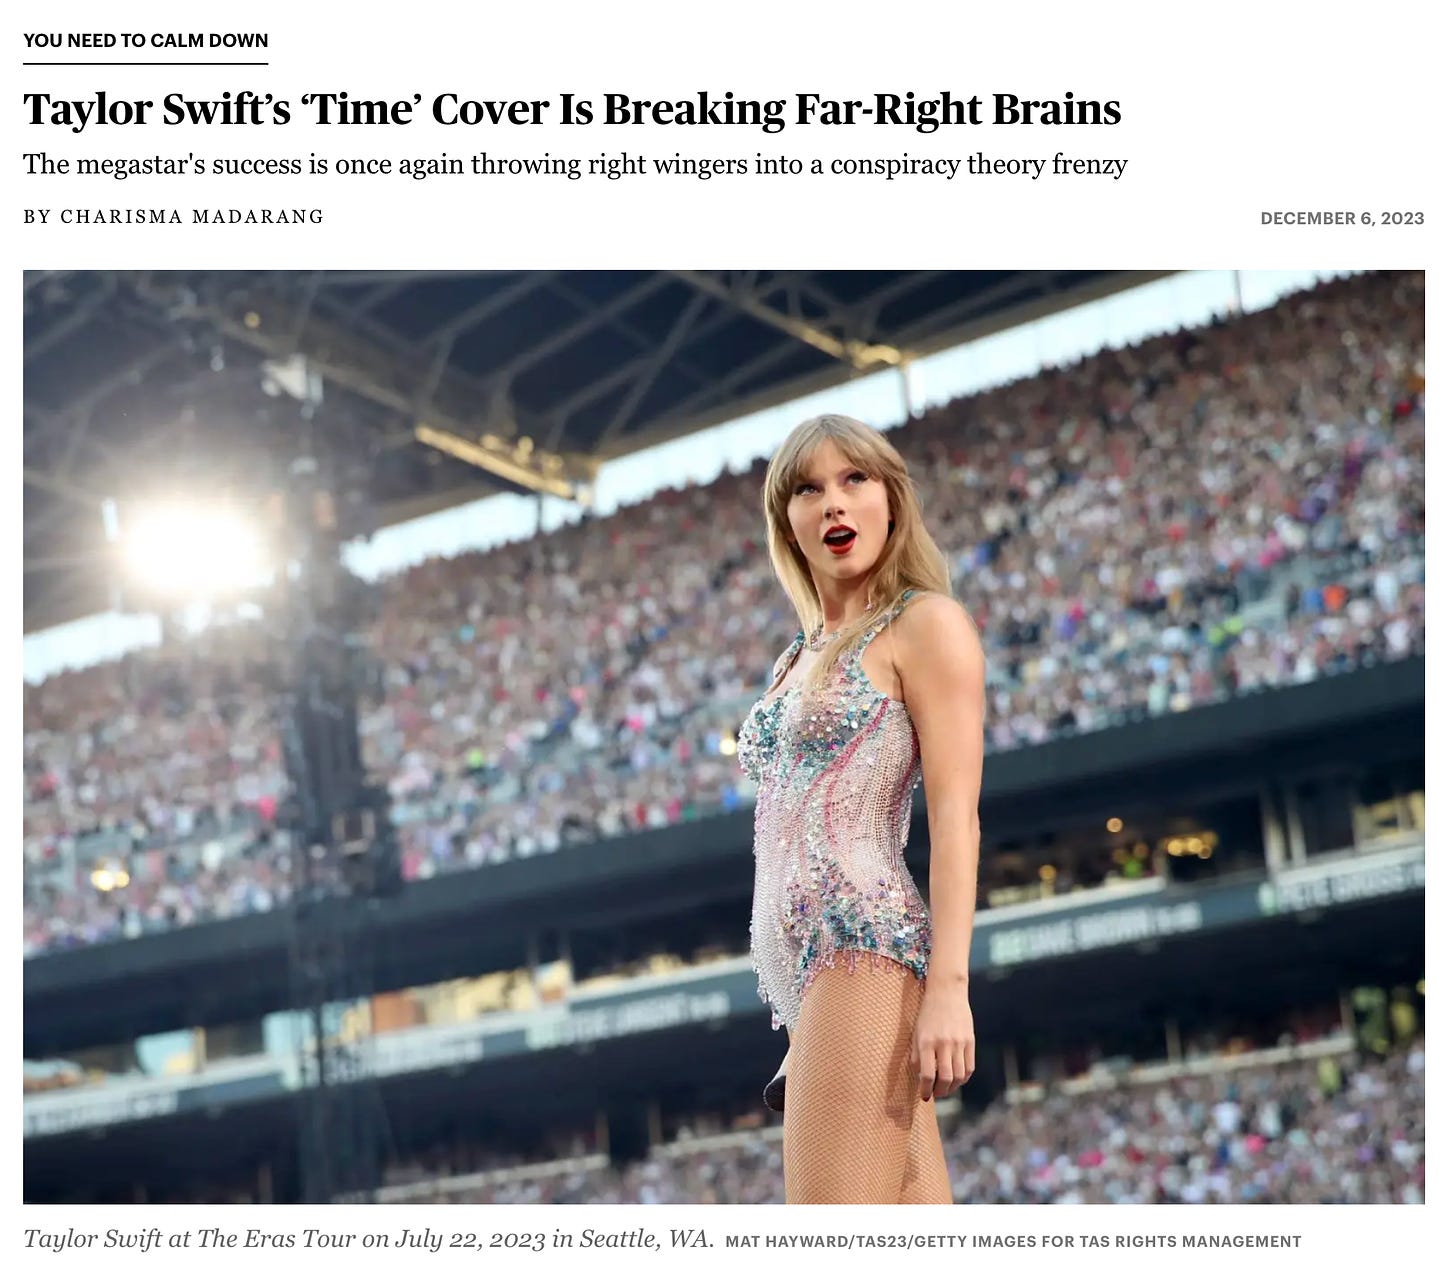 screenshot from Rolling Stone article titled “Taylor Swit’s ‘Time’ Cover Is Breaking Far-Right Brains” with the topic tag You Need to Calm Down over a shot of Swift at the Eras tour